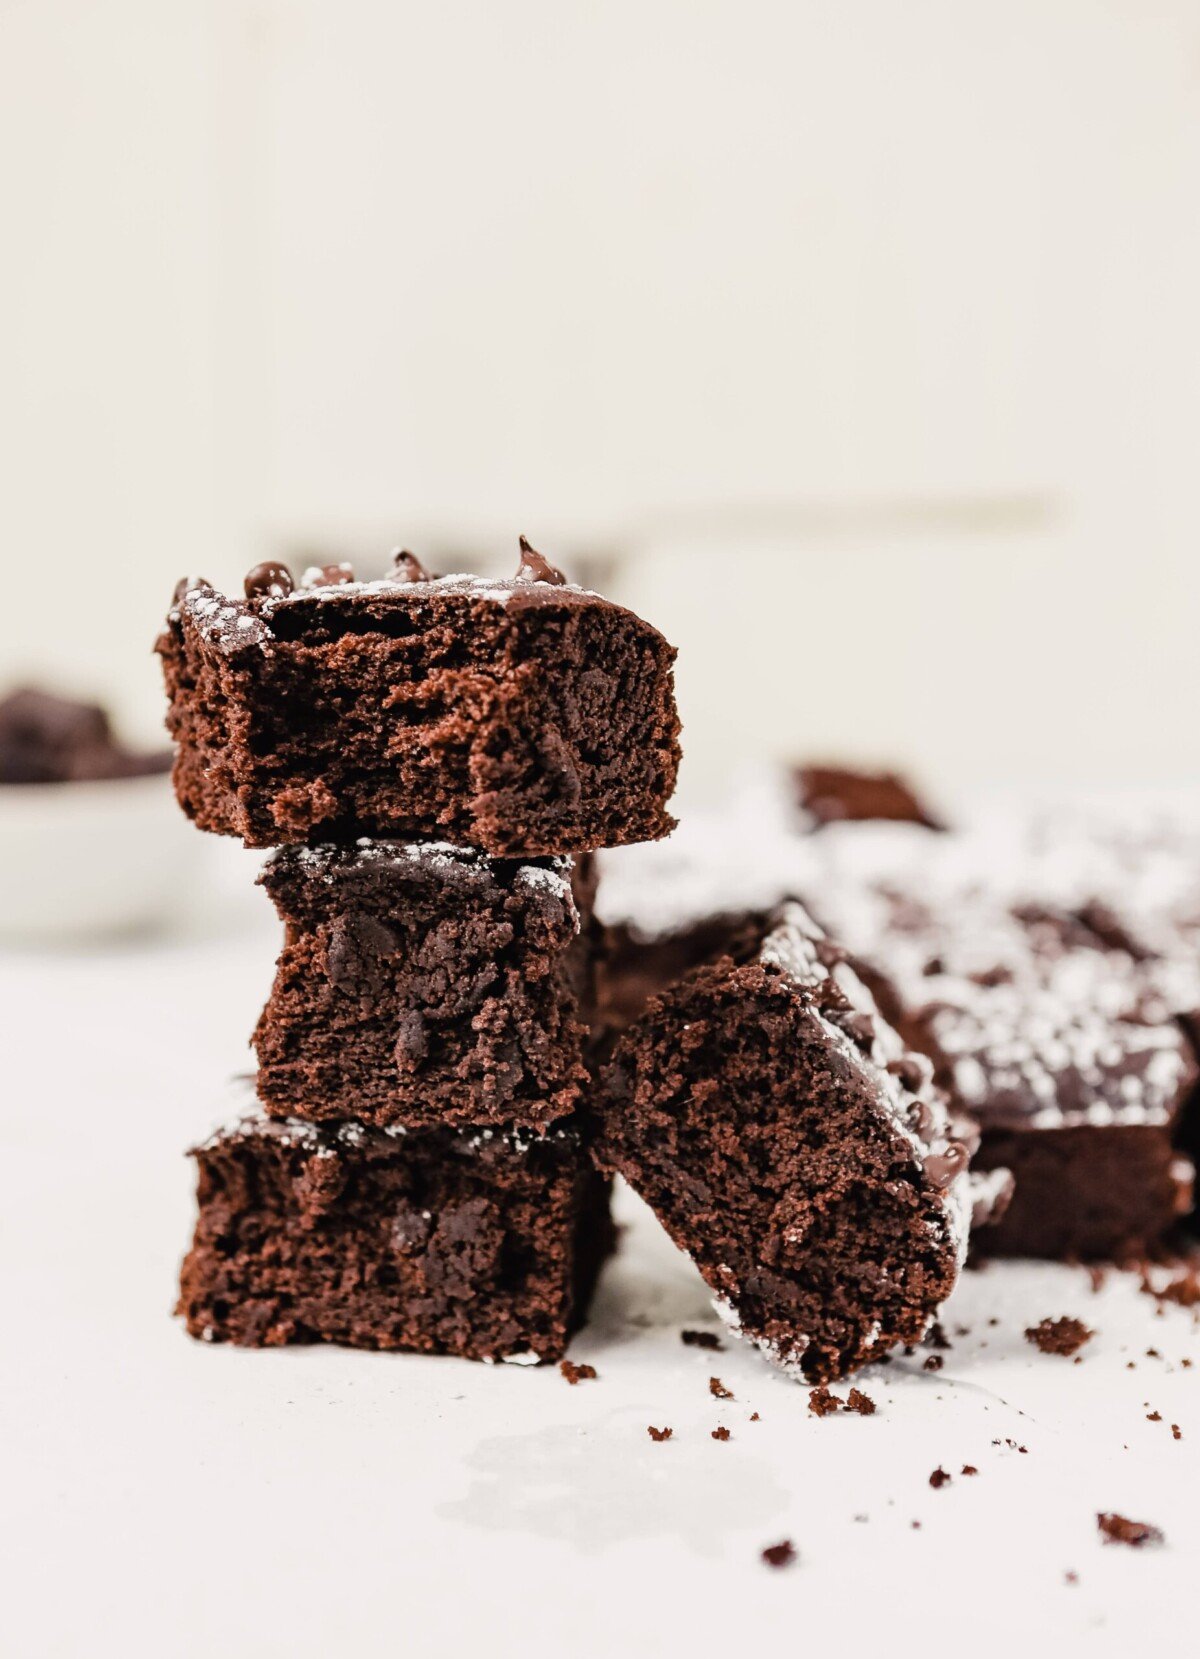 Photograph of a batch of brownies stacked on top of eachother on a white surface cut into squares and dusted with powdered sugar